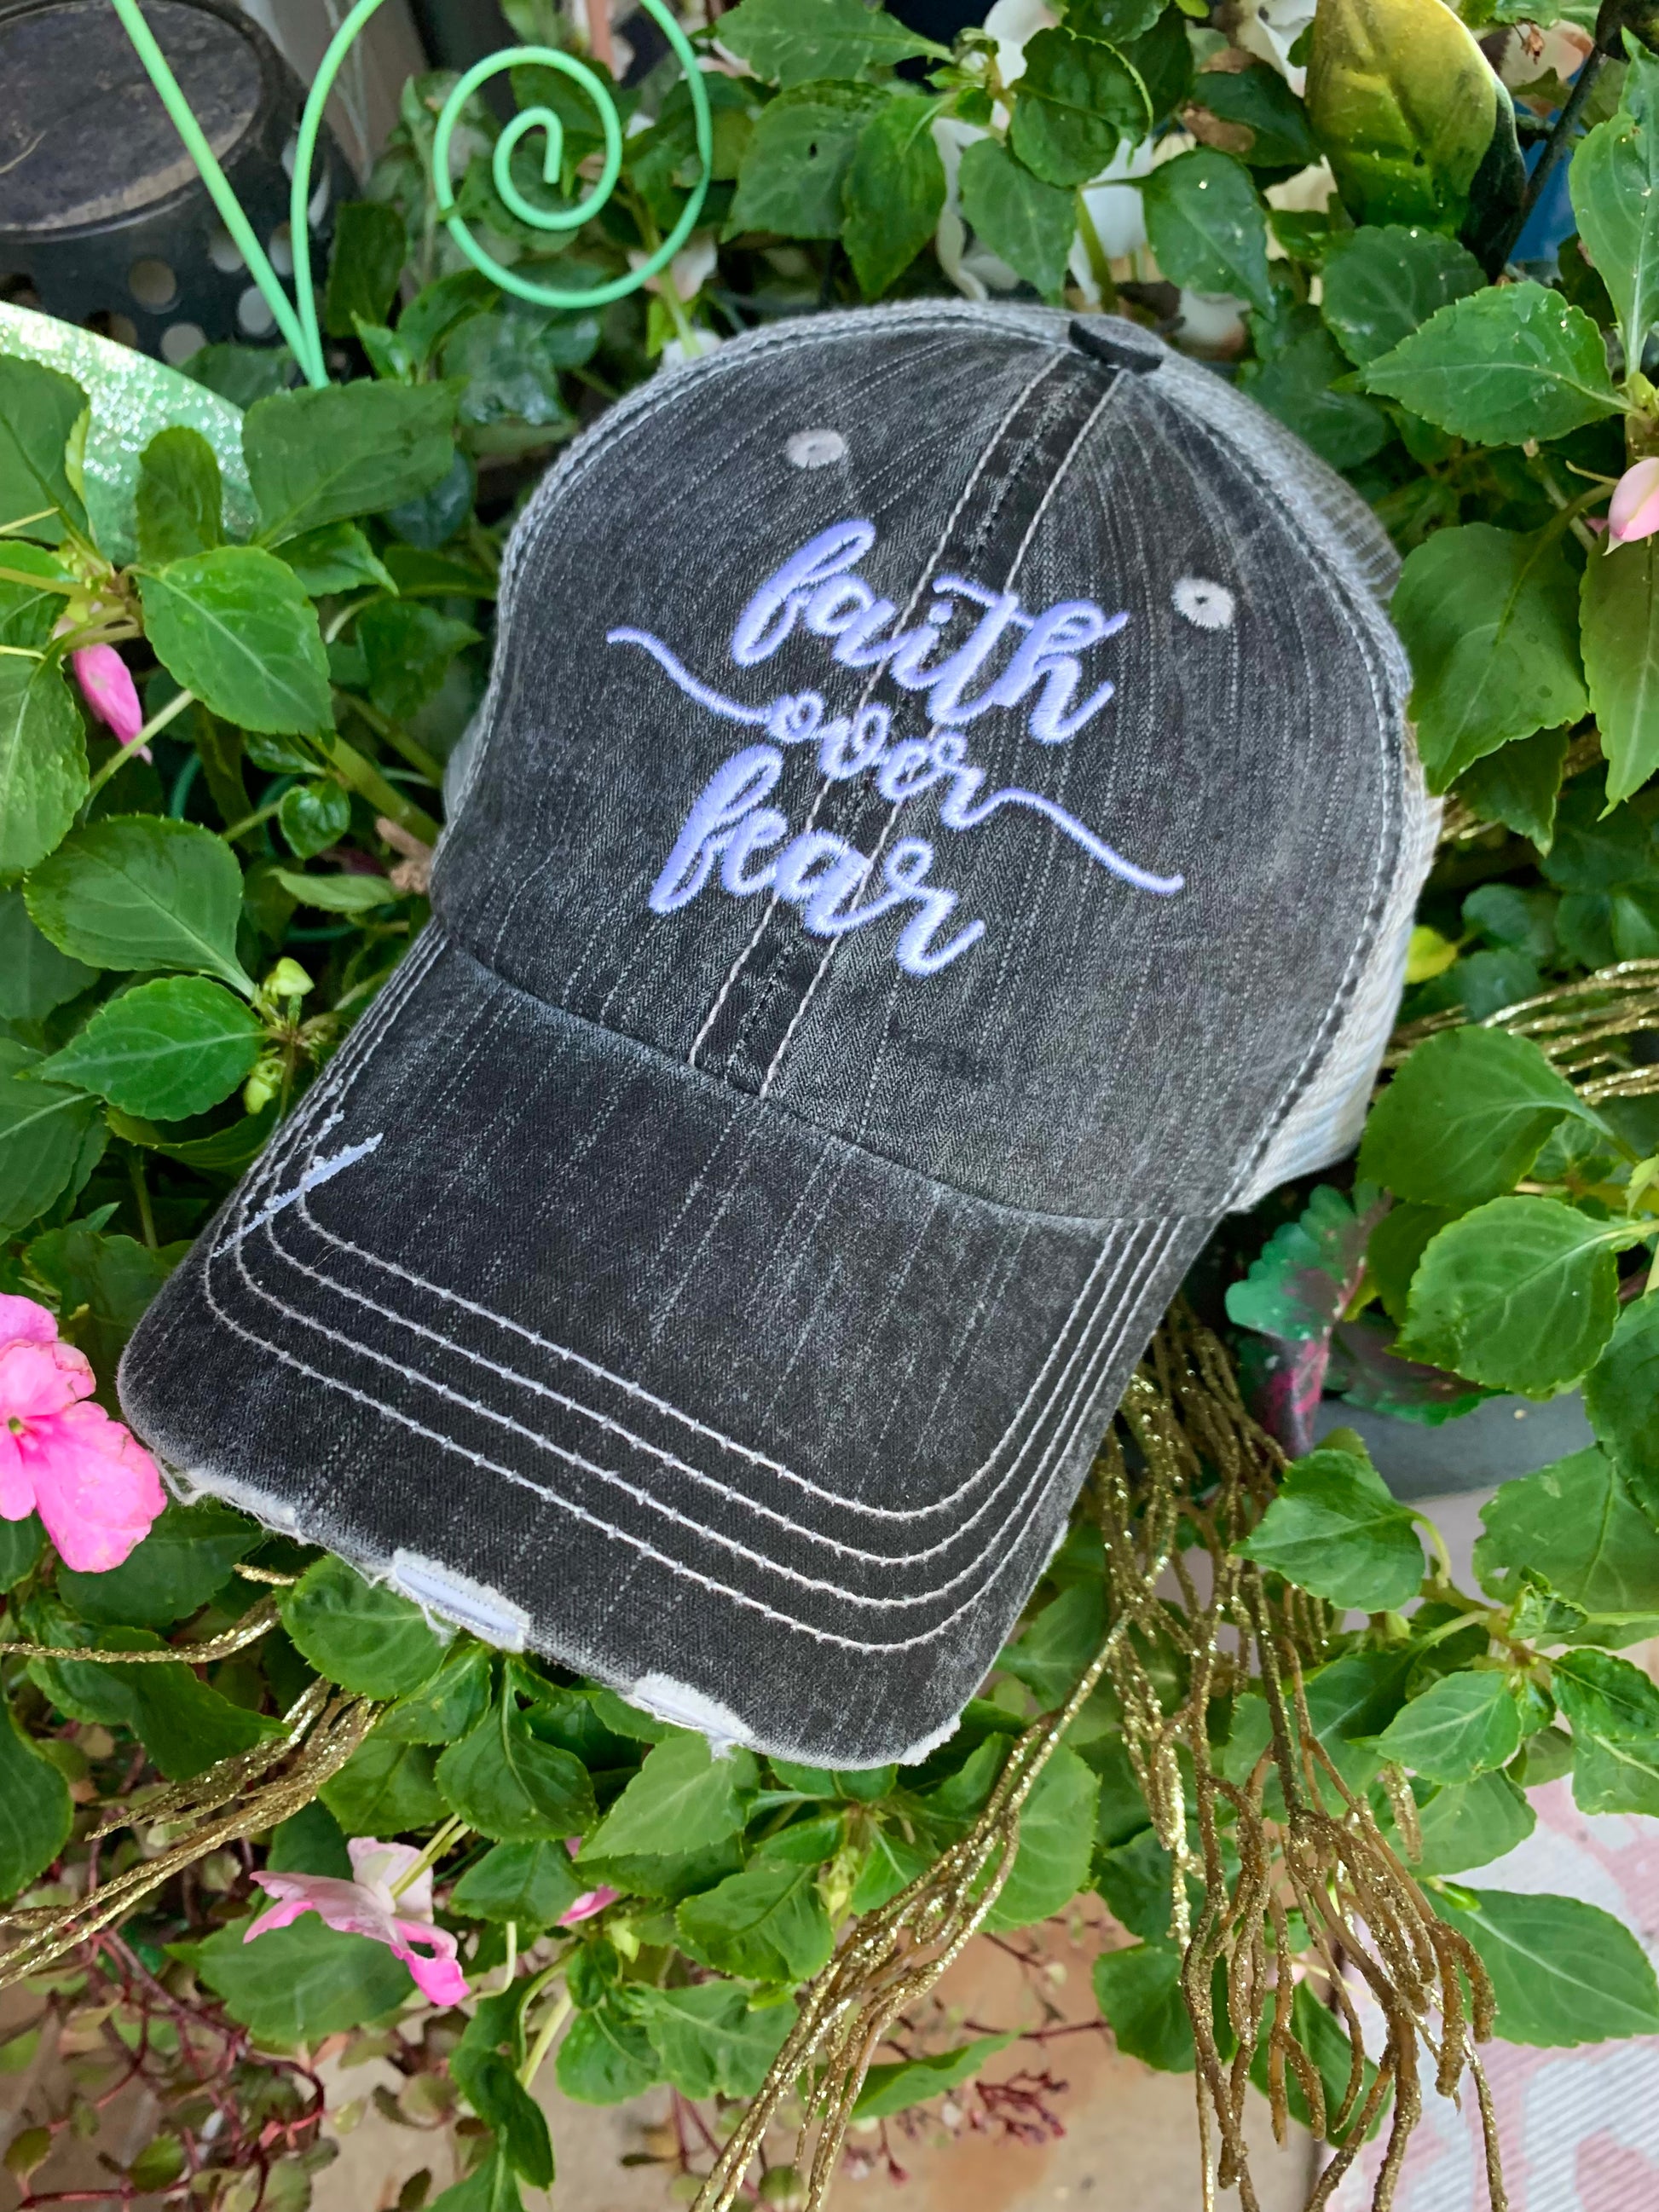 HOT MESS just doing my best hats Embroidered gray distressed unisex trucker caps Womens gift - Stacy's Pink Martini Boutique